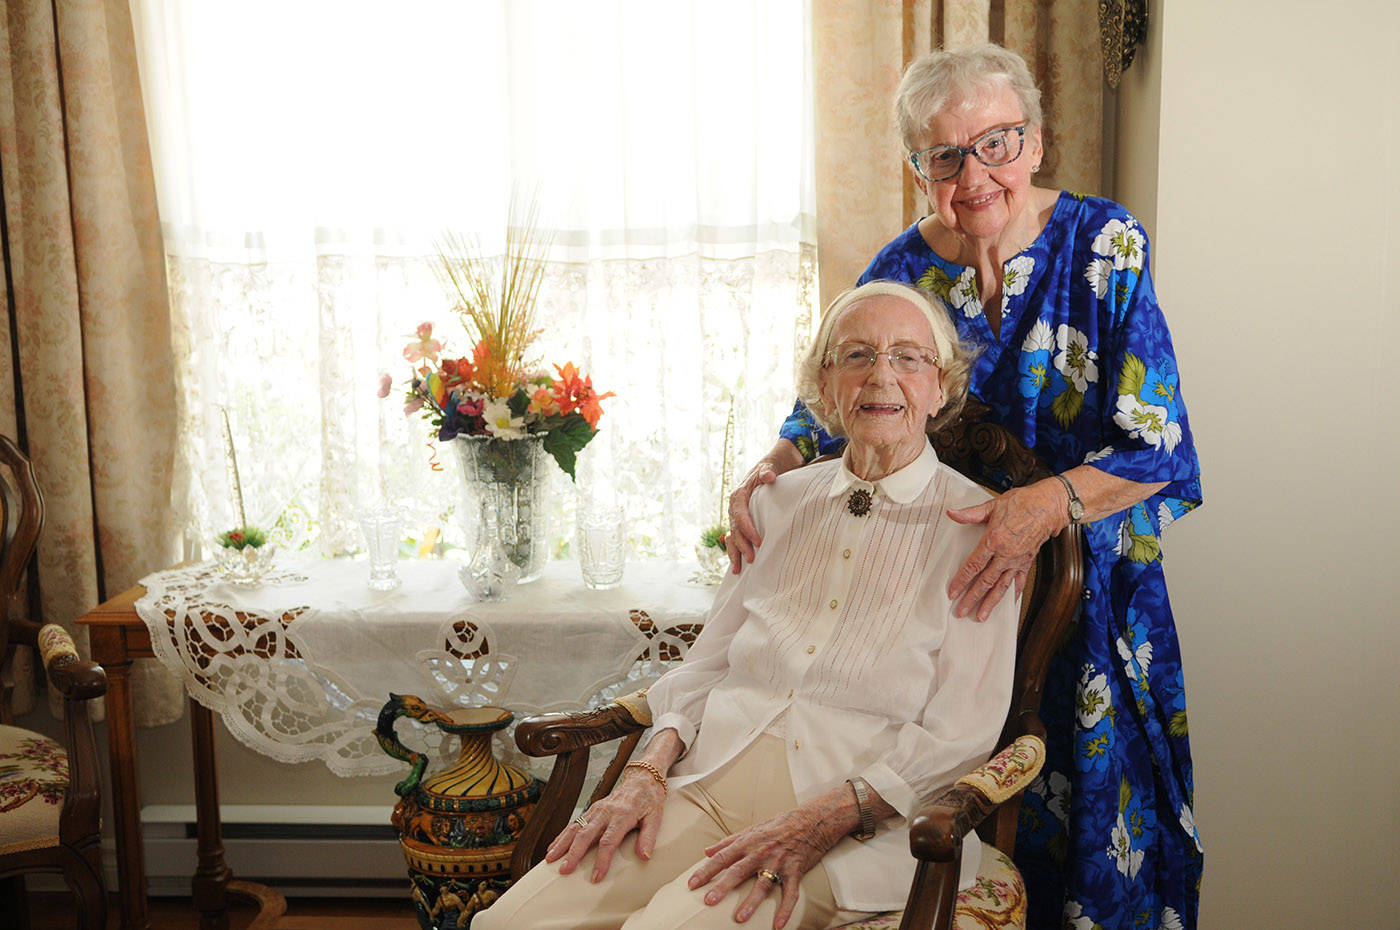 Hedy Sutulov, seen here on Aug. 12, 2021 with friend Leasl White, turned 107 on Aug. 18, 2021. (Jenna Hauck/ Chilliwack Progress)